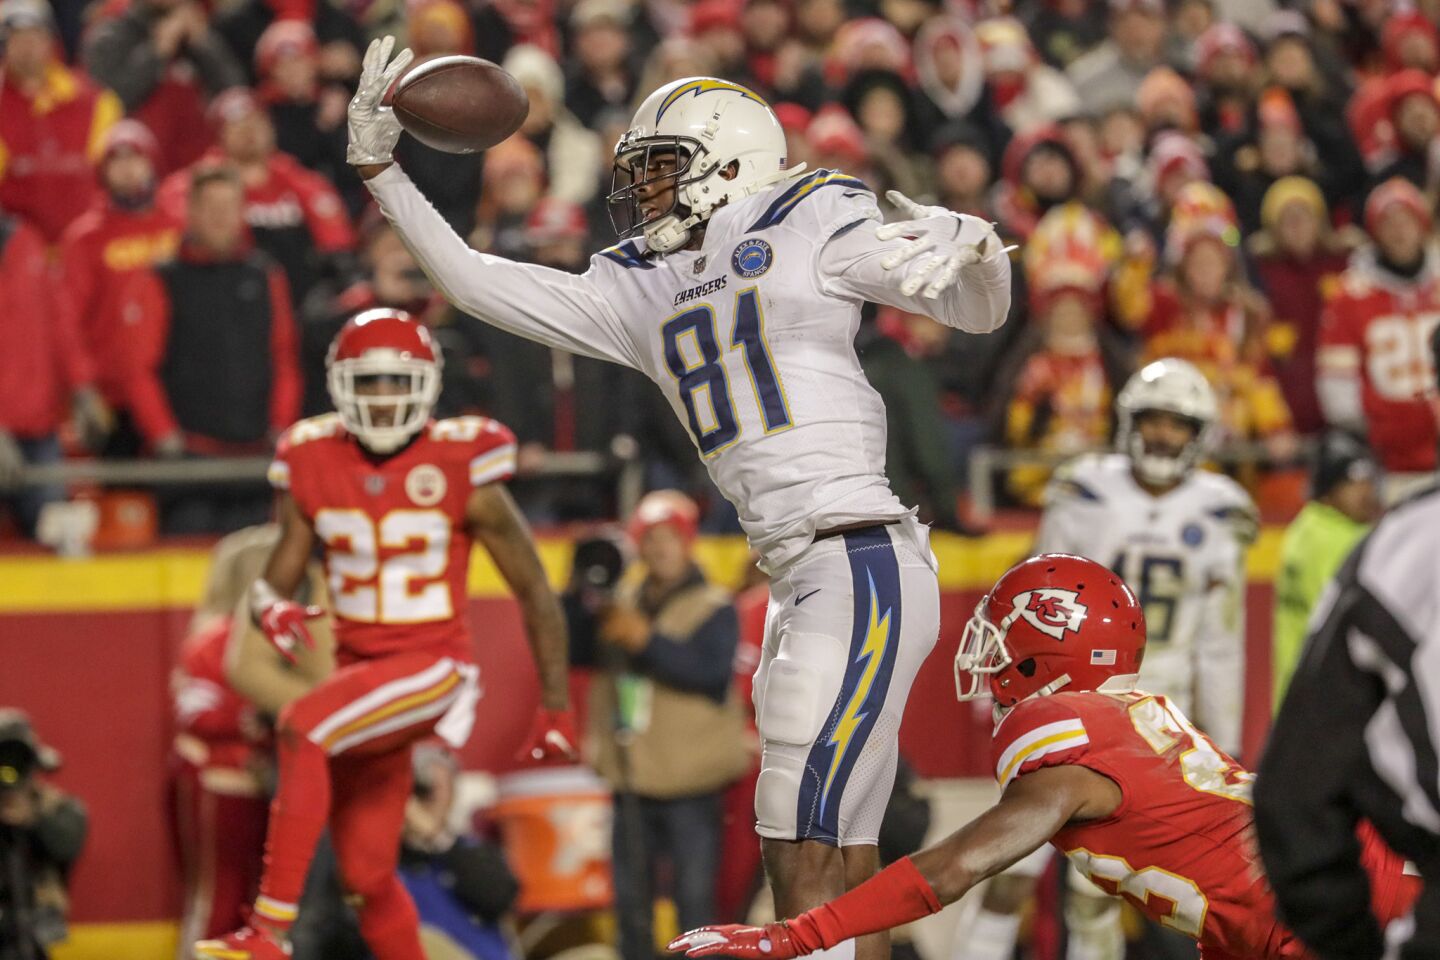 Chargers receiver can’t pull in a pass, but Chiefs cornerback Kendall Fuller was flagged for pass interference.